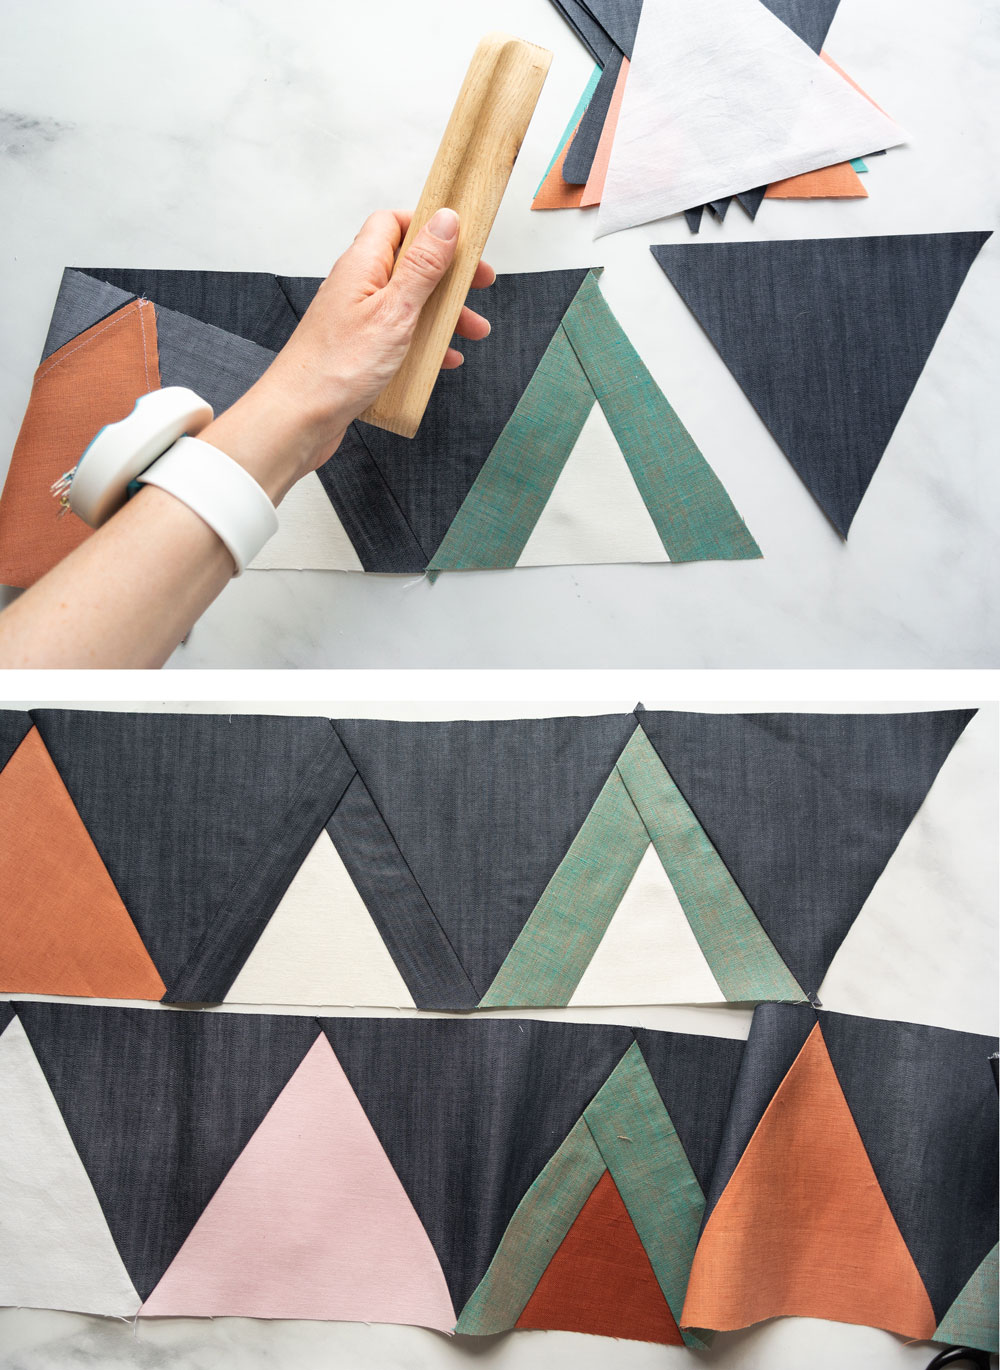 Join the Mod Mountains quilt pattern sew along! Learn new quilting skills and win weekly prizes as an online sewing community. Together we cover sewing with linen and different kinds of fabric, cutting with templates and sewing triangles.